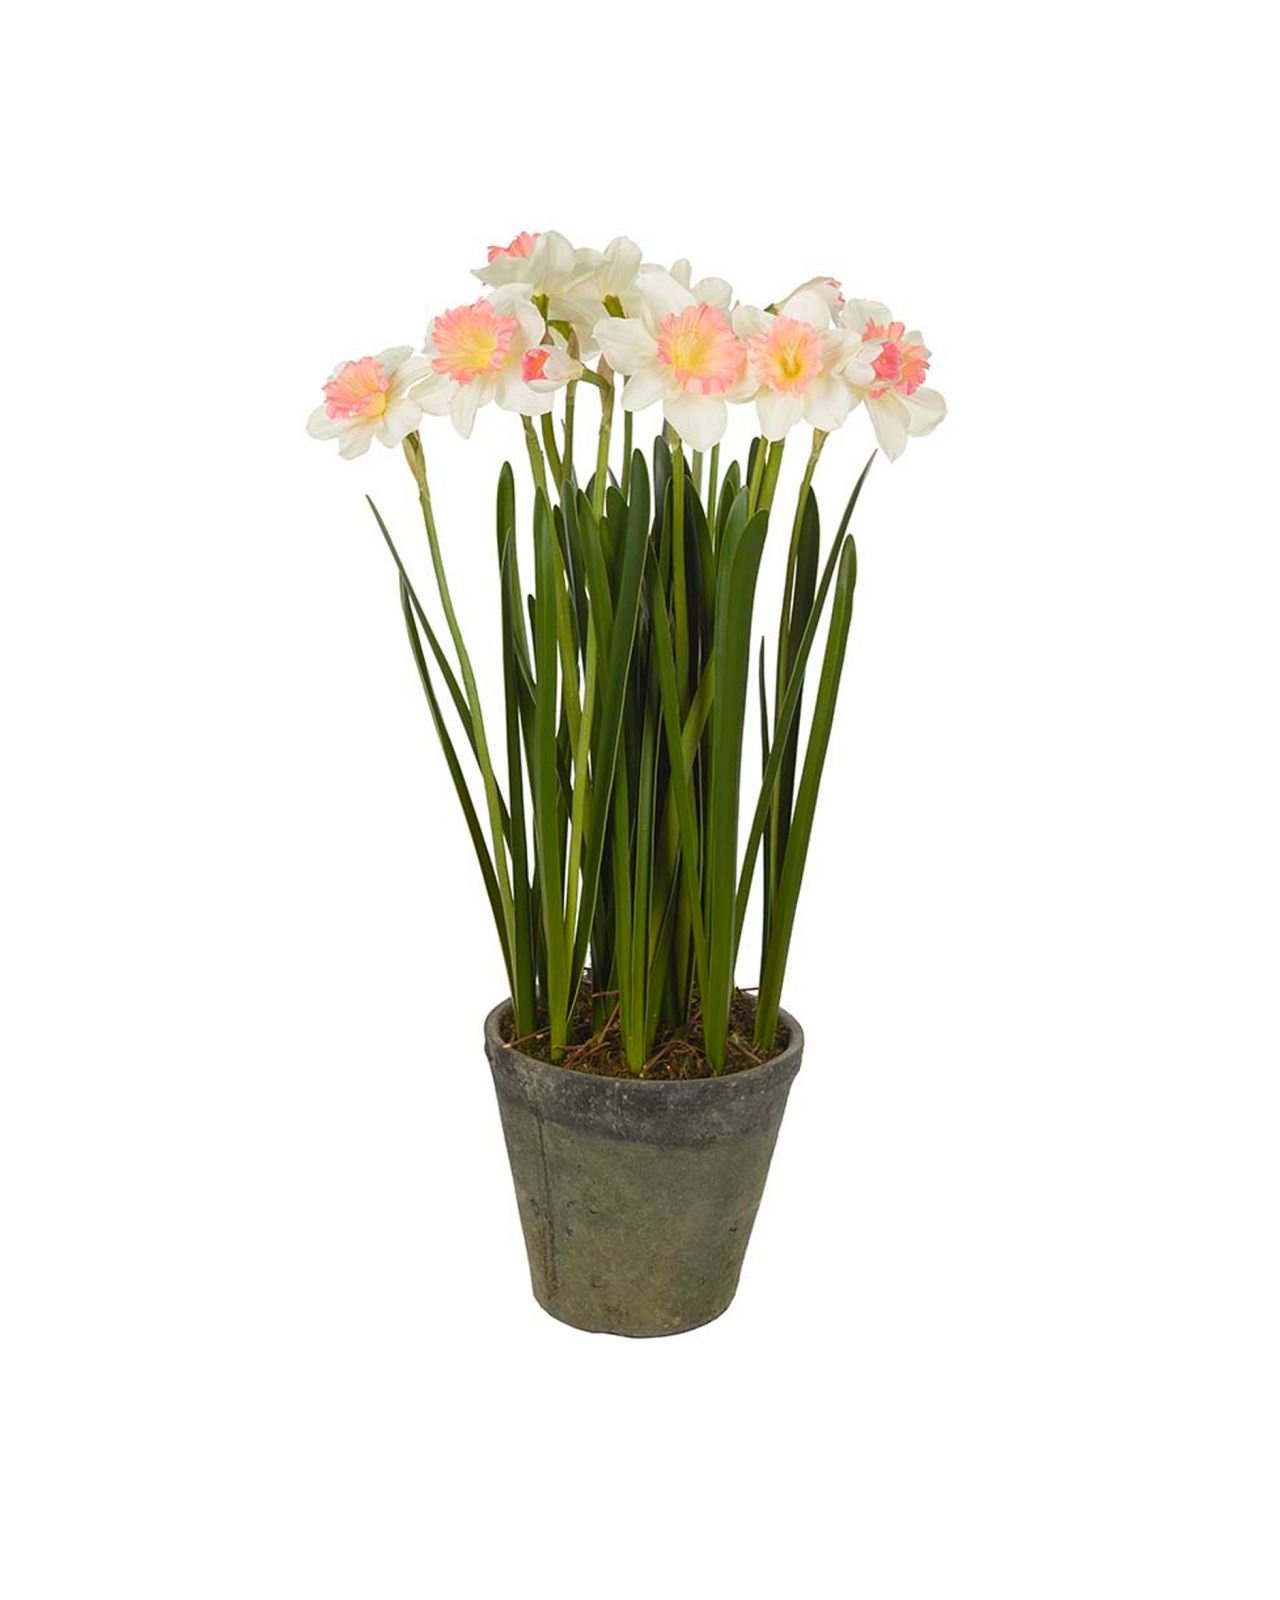 Narcissus Potted Plant White/Pink